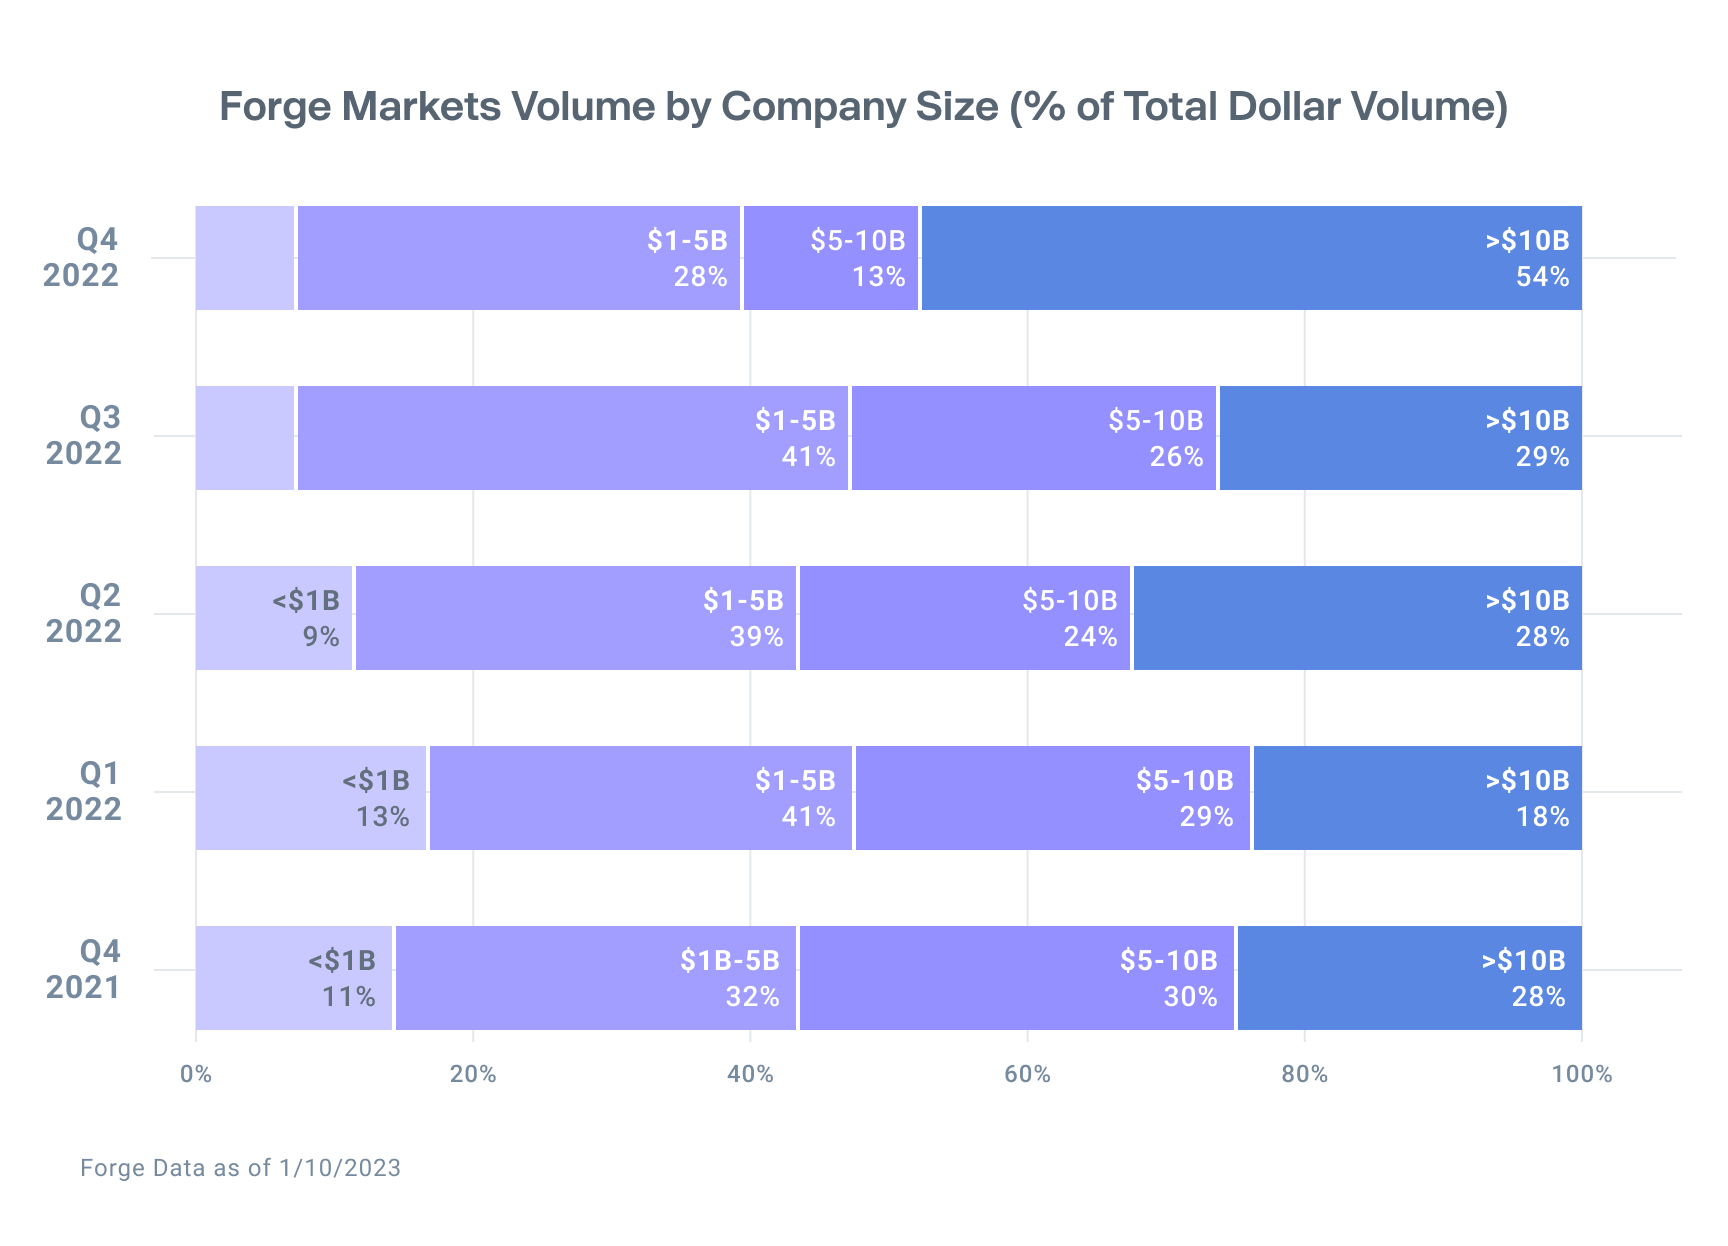 Chart shows an increase in volume (% of total dollar volume) for $10B+ companies in Q4 2022